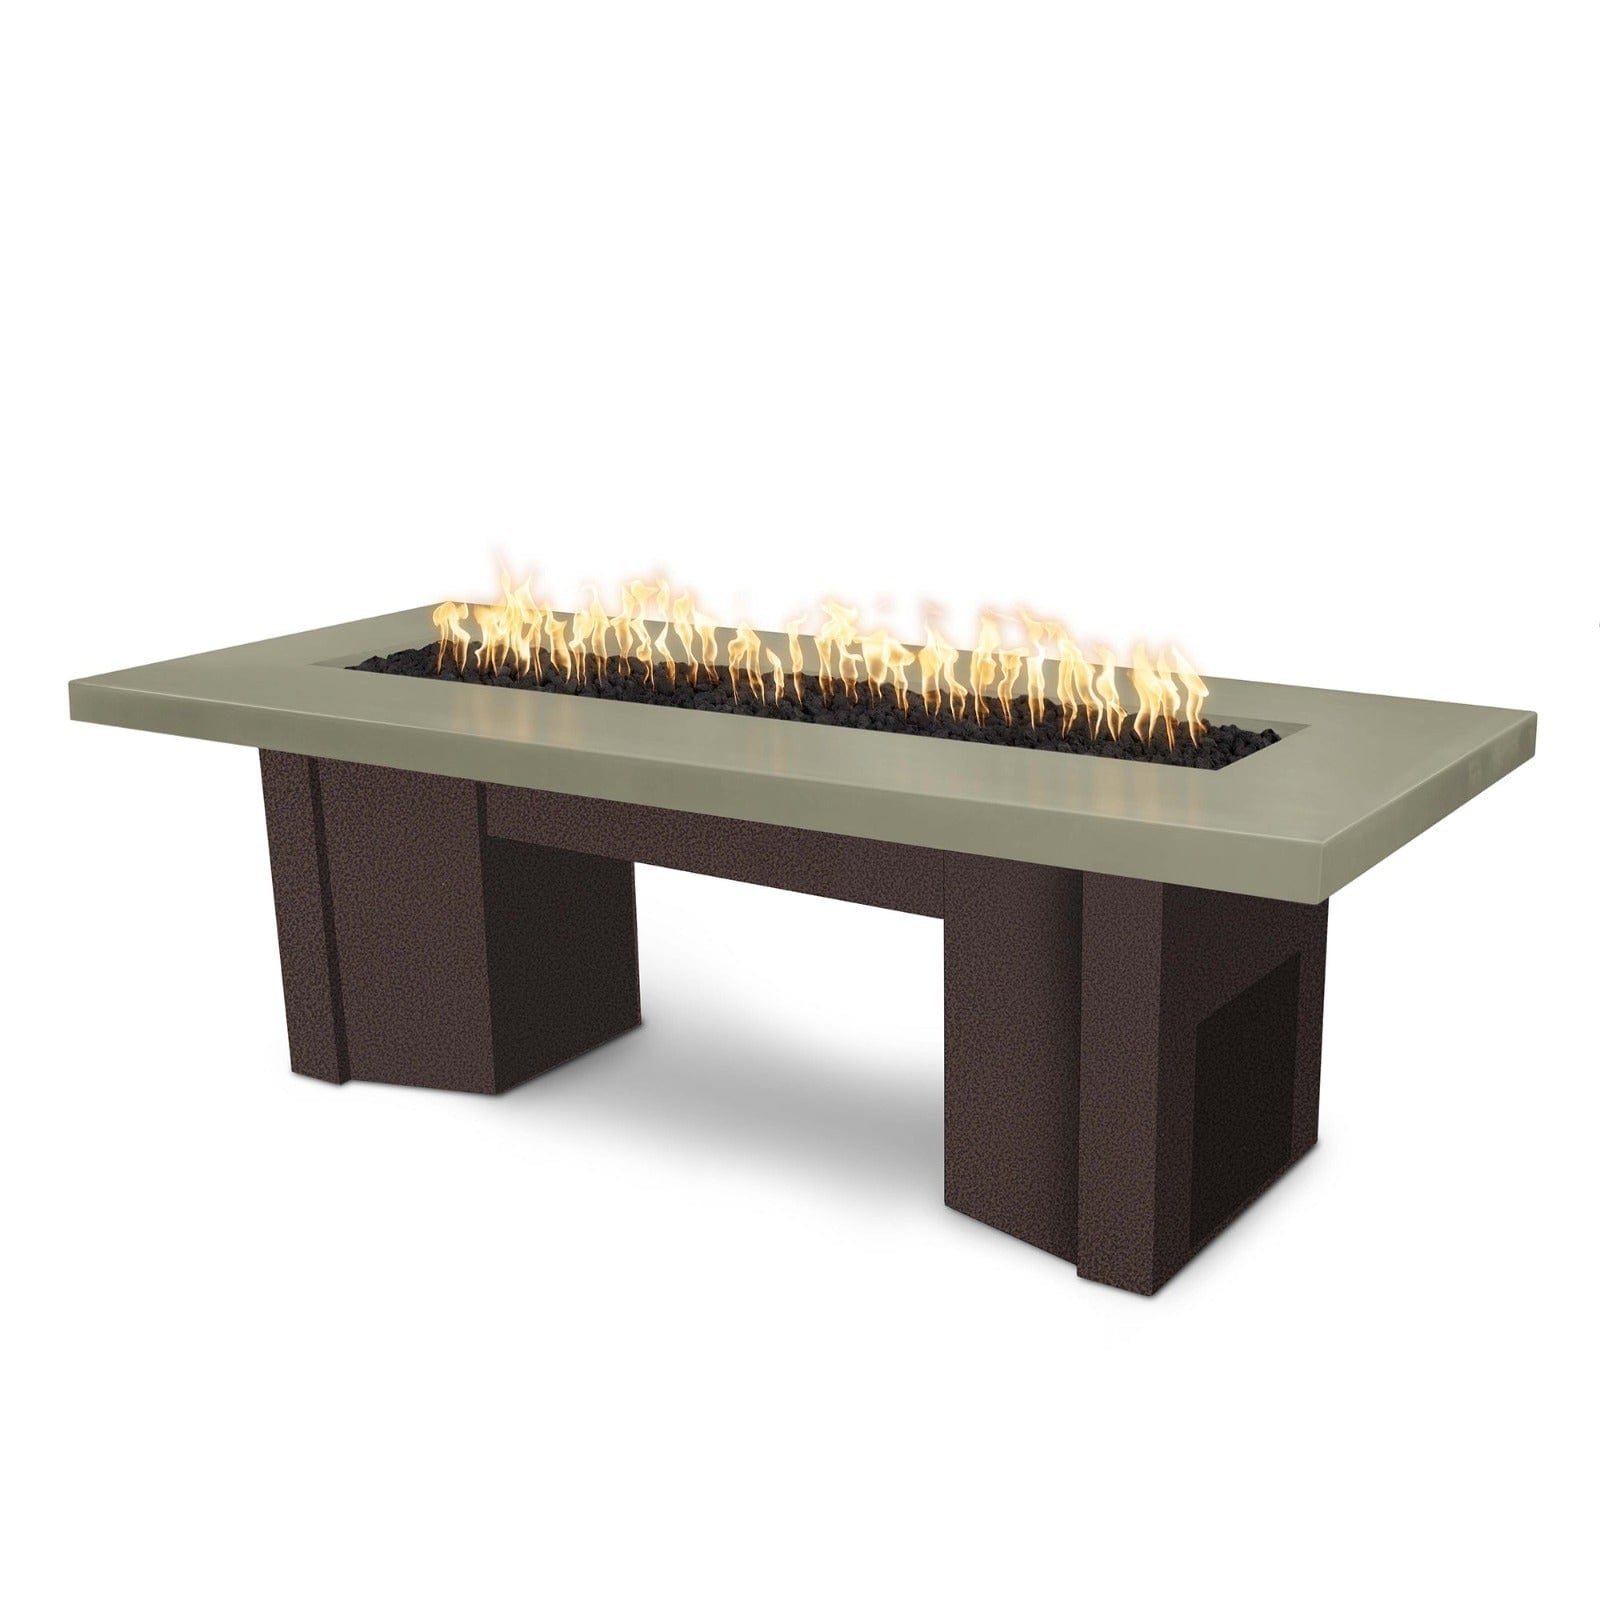 The Outdoor Plus Fire Features Ash (-ASH) / Copper Vein Powder Coated Steel (-CPV) The Outdoor Plus 60" Alameda Fire Table Smooth Concrete in Liquid Propane - Flame Sense System with Push Button Spark Igniter / OPT-ALMGFRC60FSEN-LP